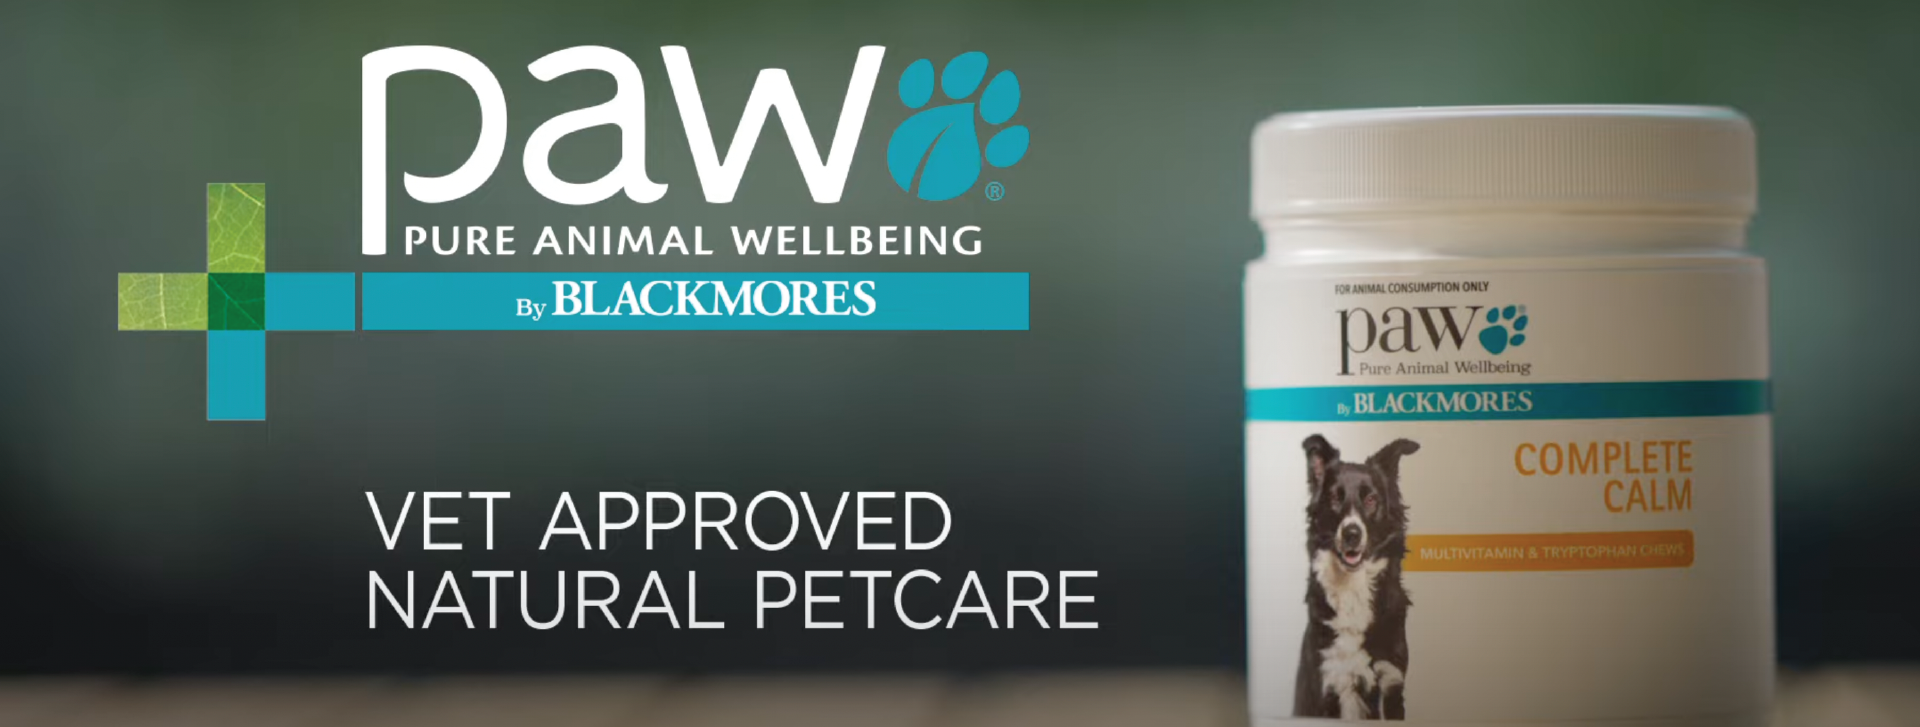 PAW By Blackmores vitamins and supplements for cats and dogs. 